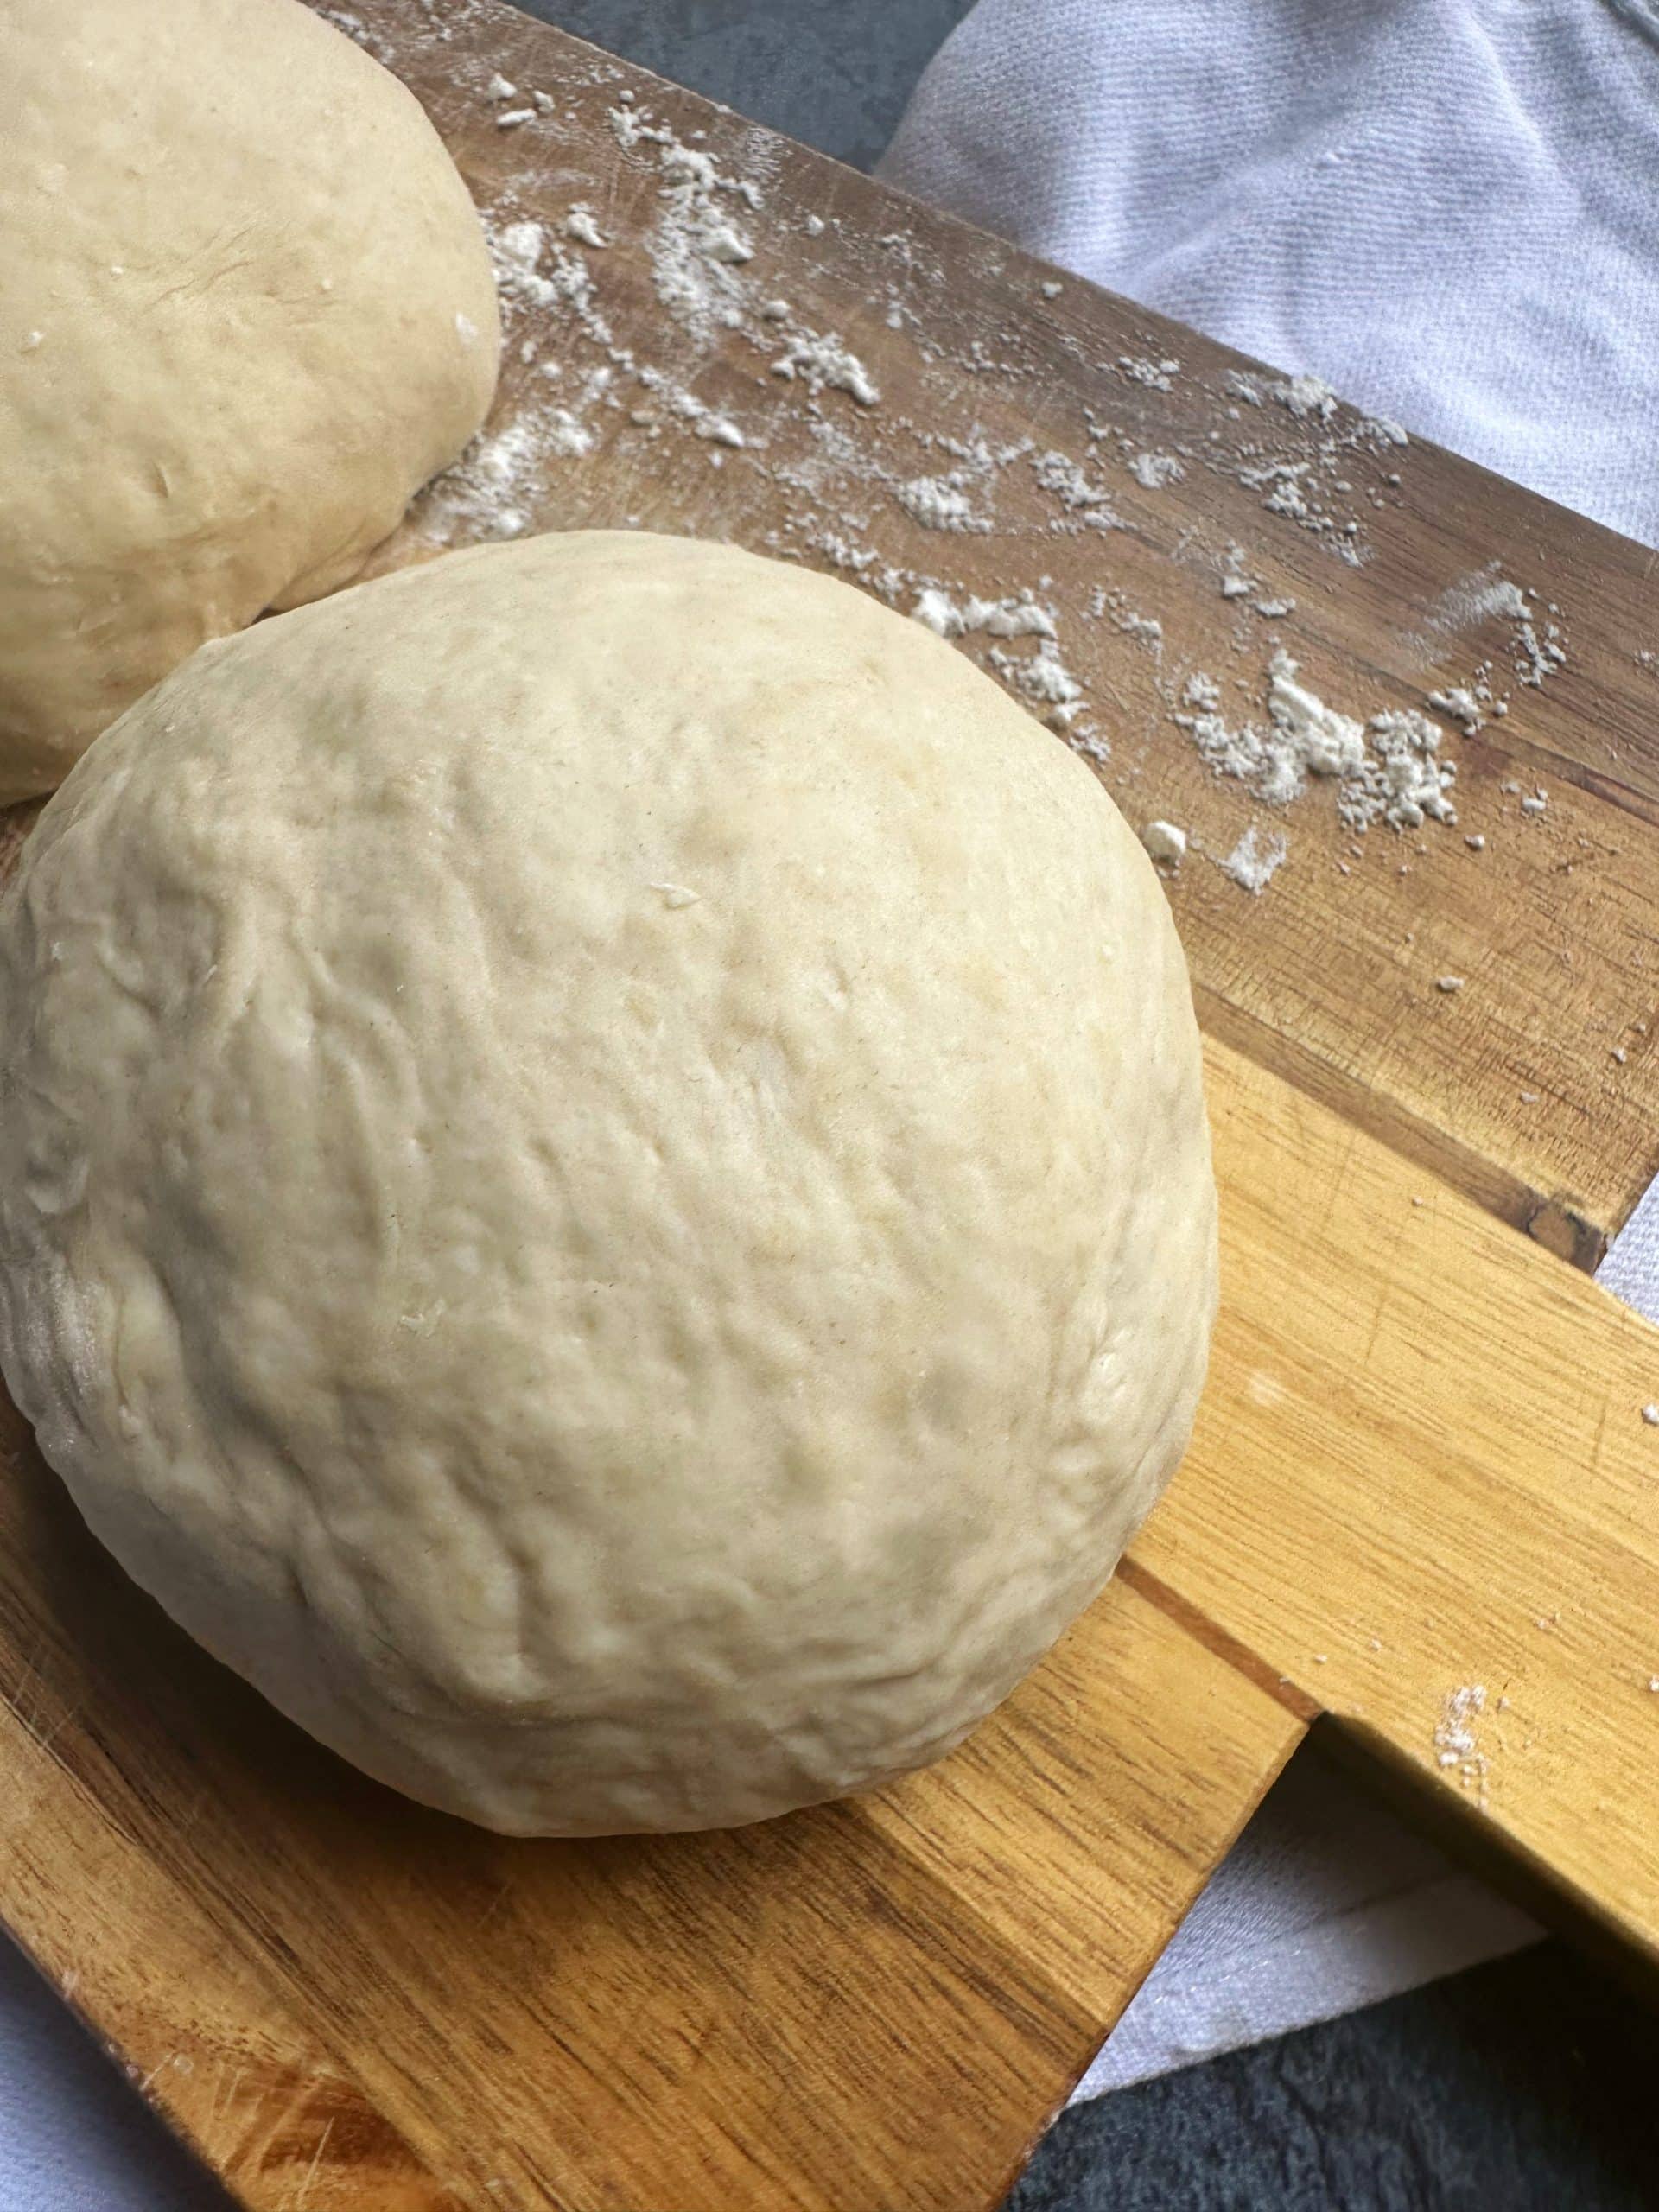 A flour-dusted wooden board containing two balls of no-rise homemade pizza dough with yeast.